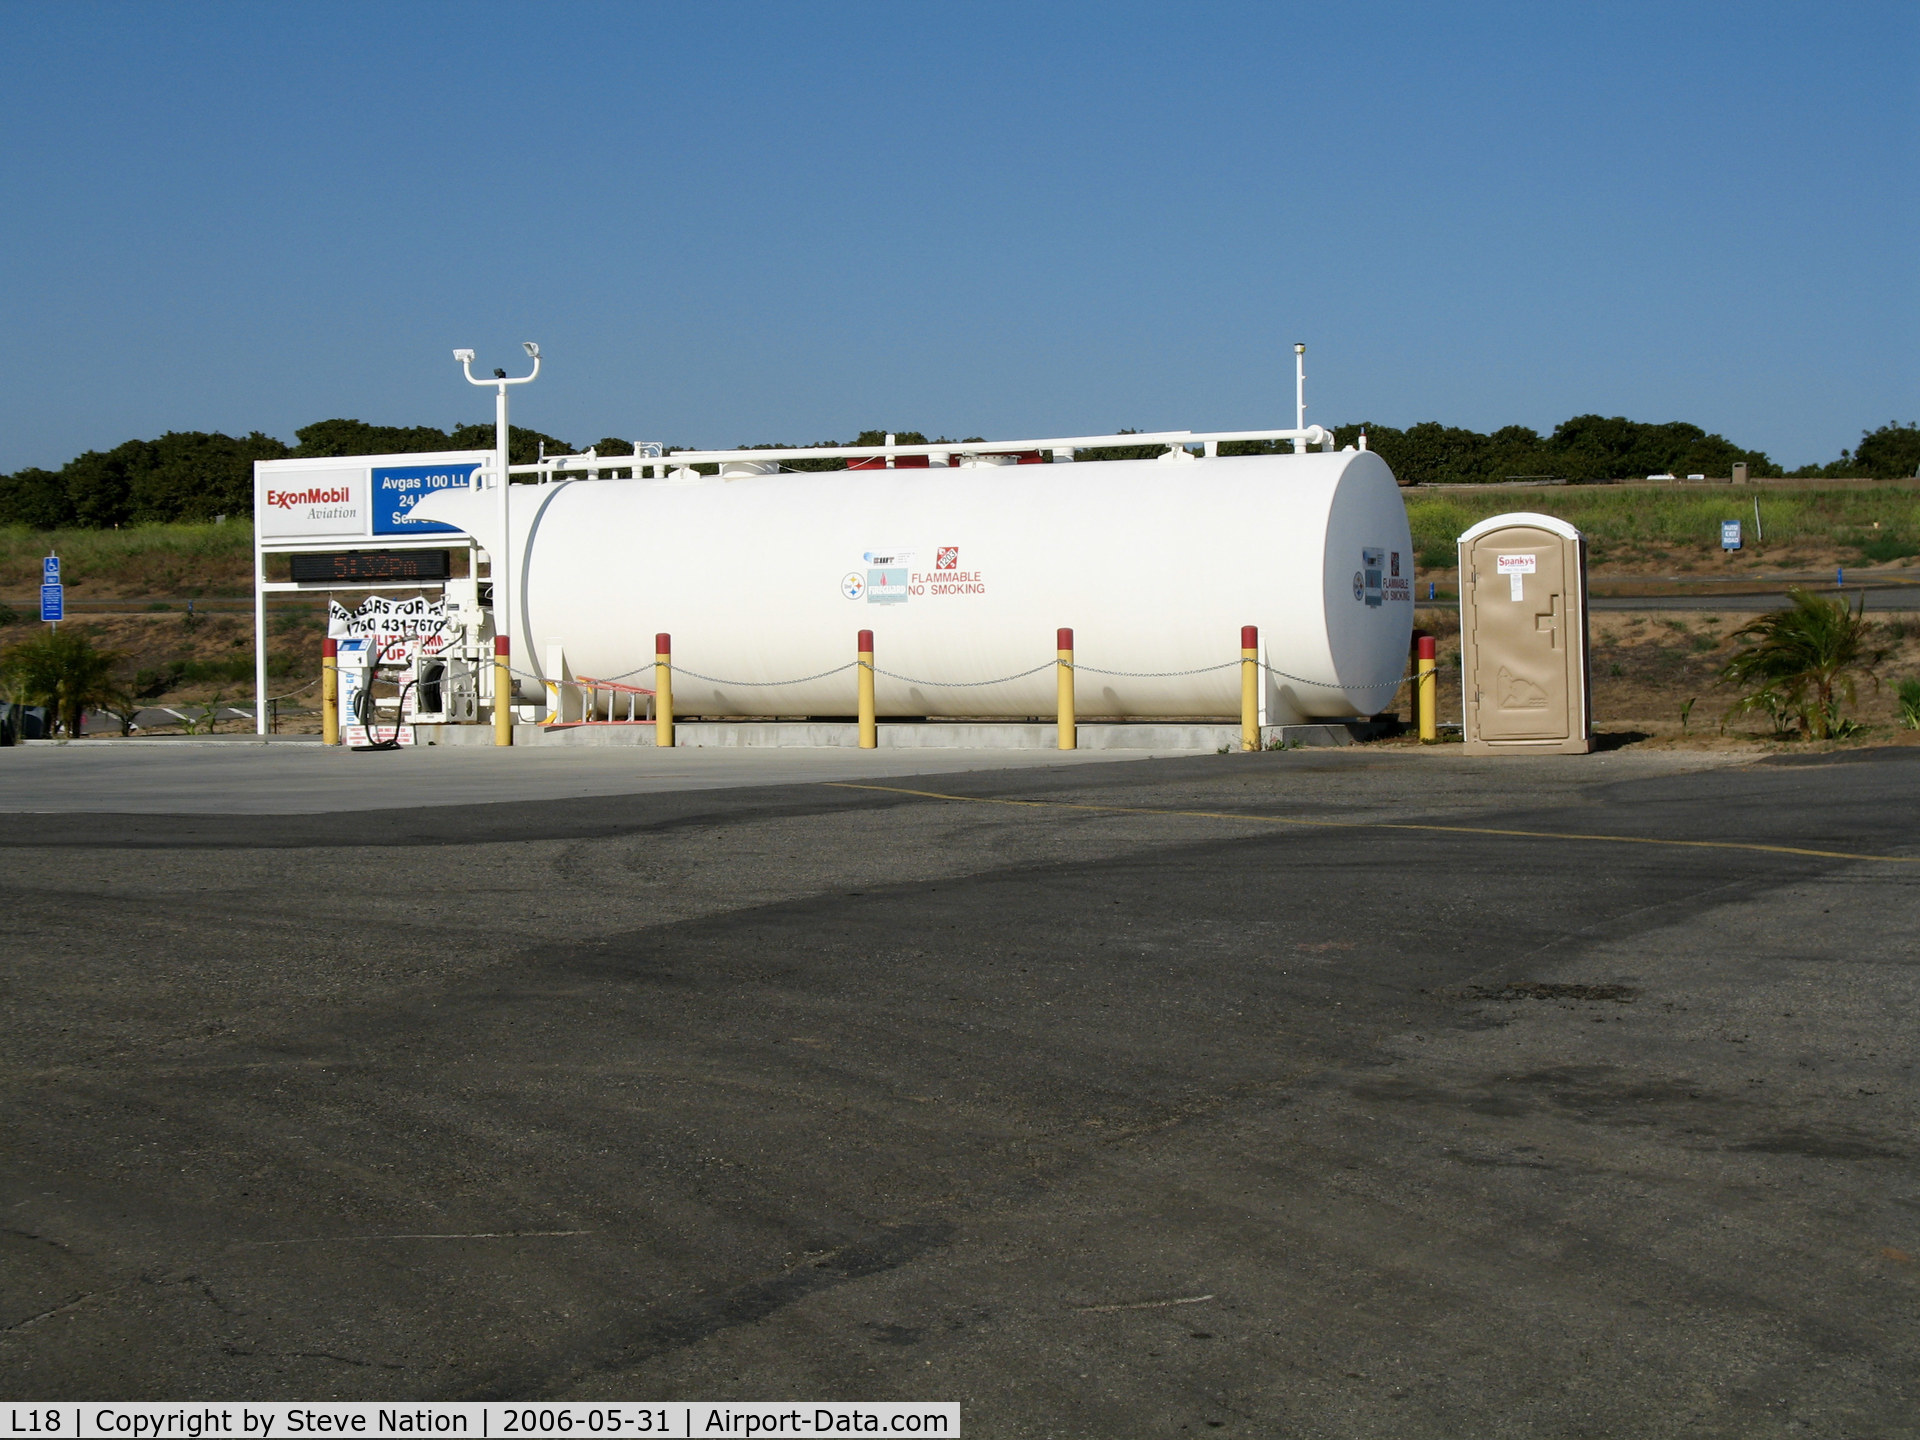 Fallbrook Community Airpark Airport (L18) - Gas tanks and pumps @ Fallbrook Community Airpark Airport, CA